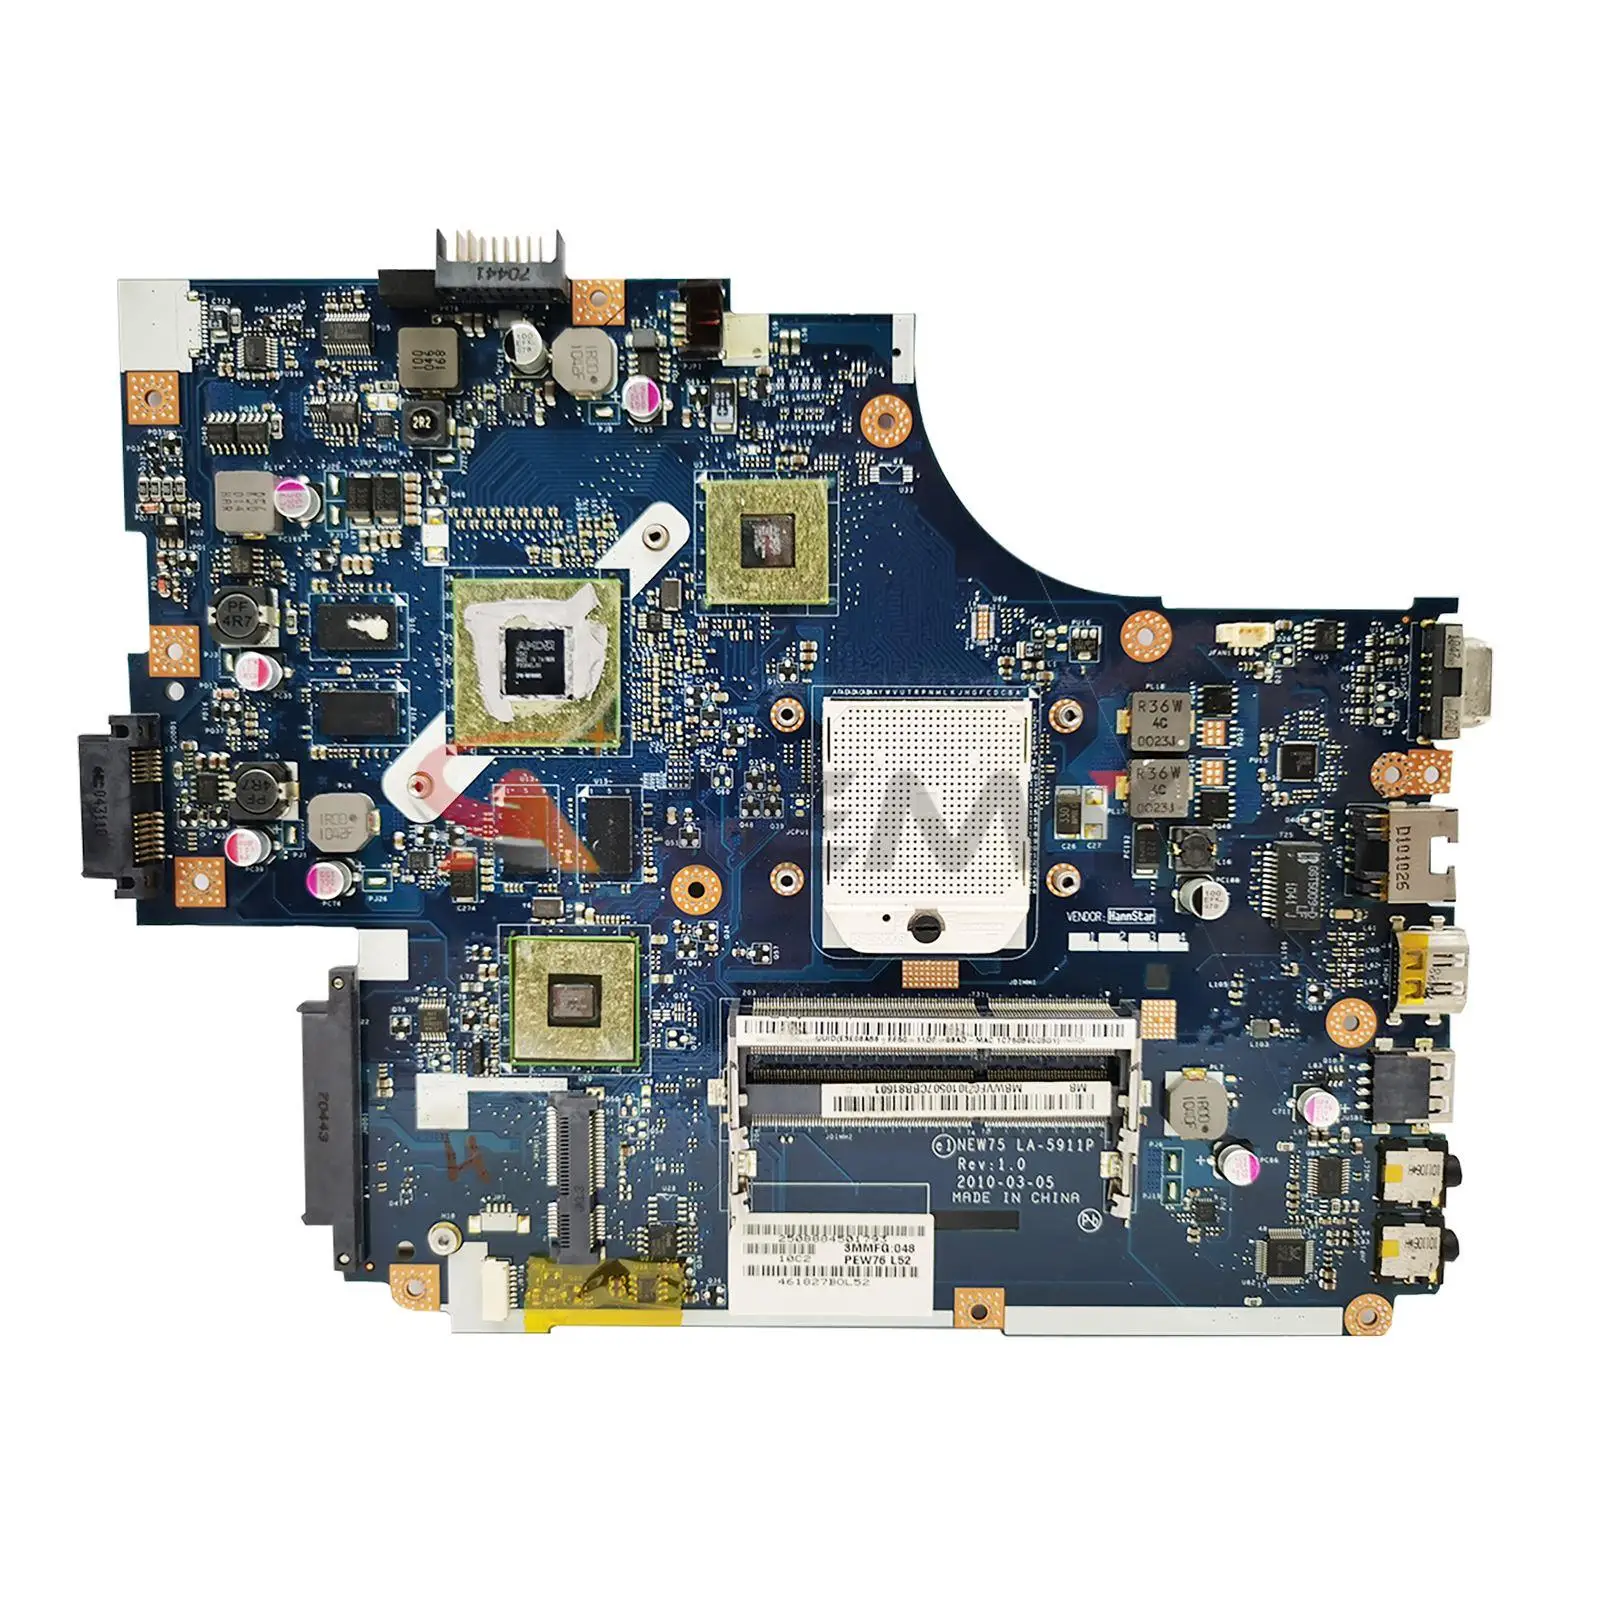 

NEW75 LA-5911P For Acer Aspire 5551G 5552G Laptop Motherboard With HD5650M HD6470M 512M/1GB-GPU MBPUU02001 MB.WVE02.001